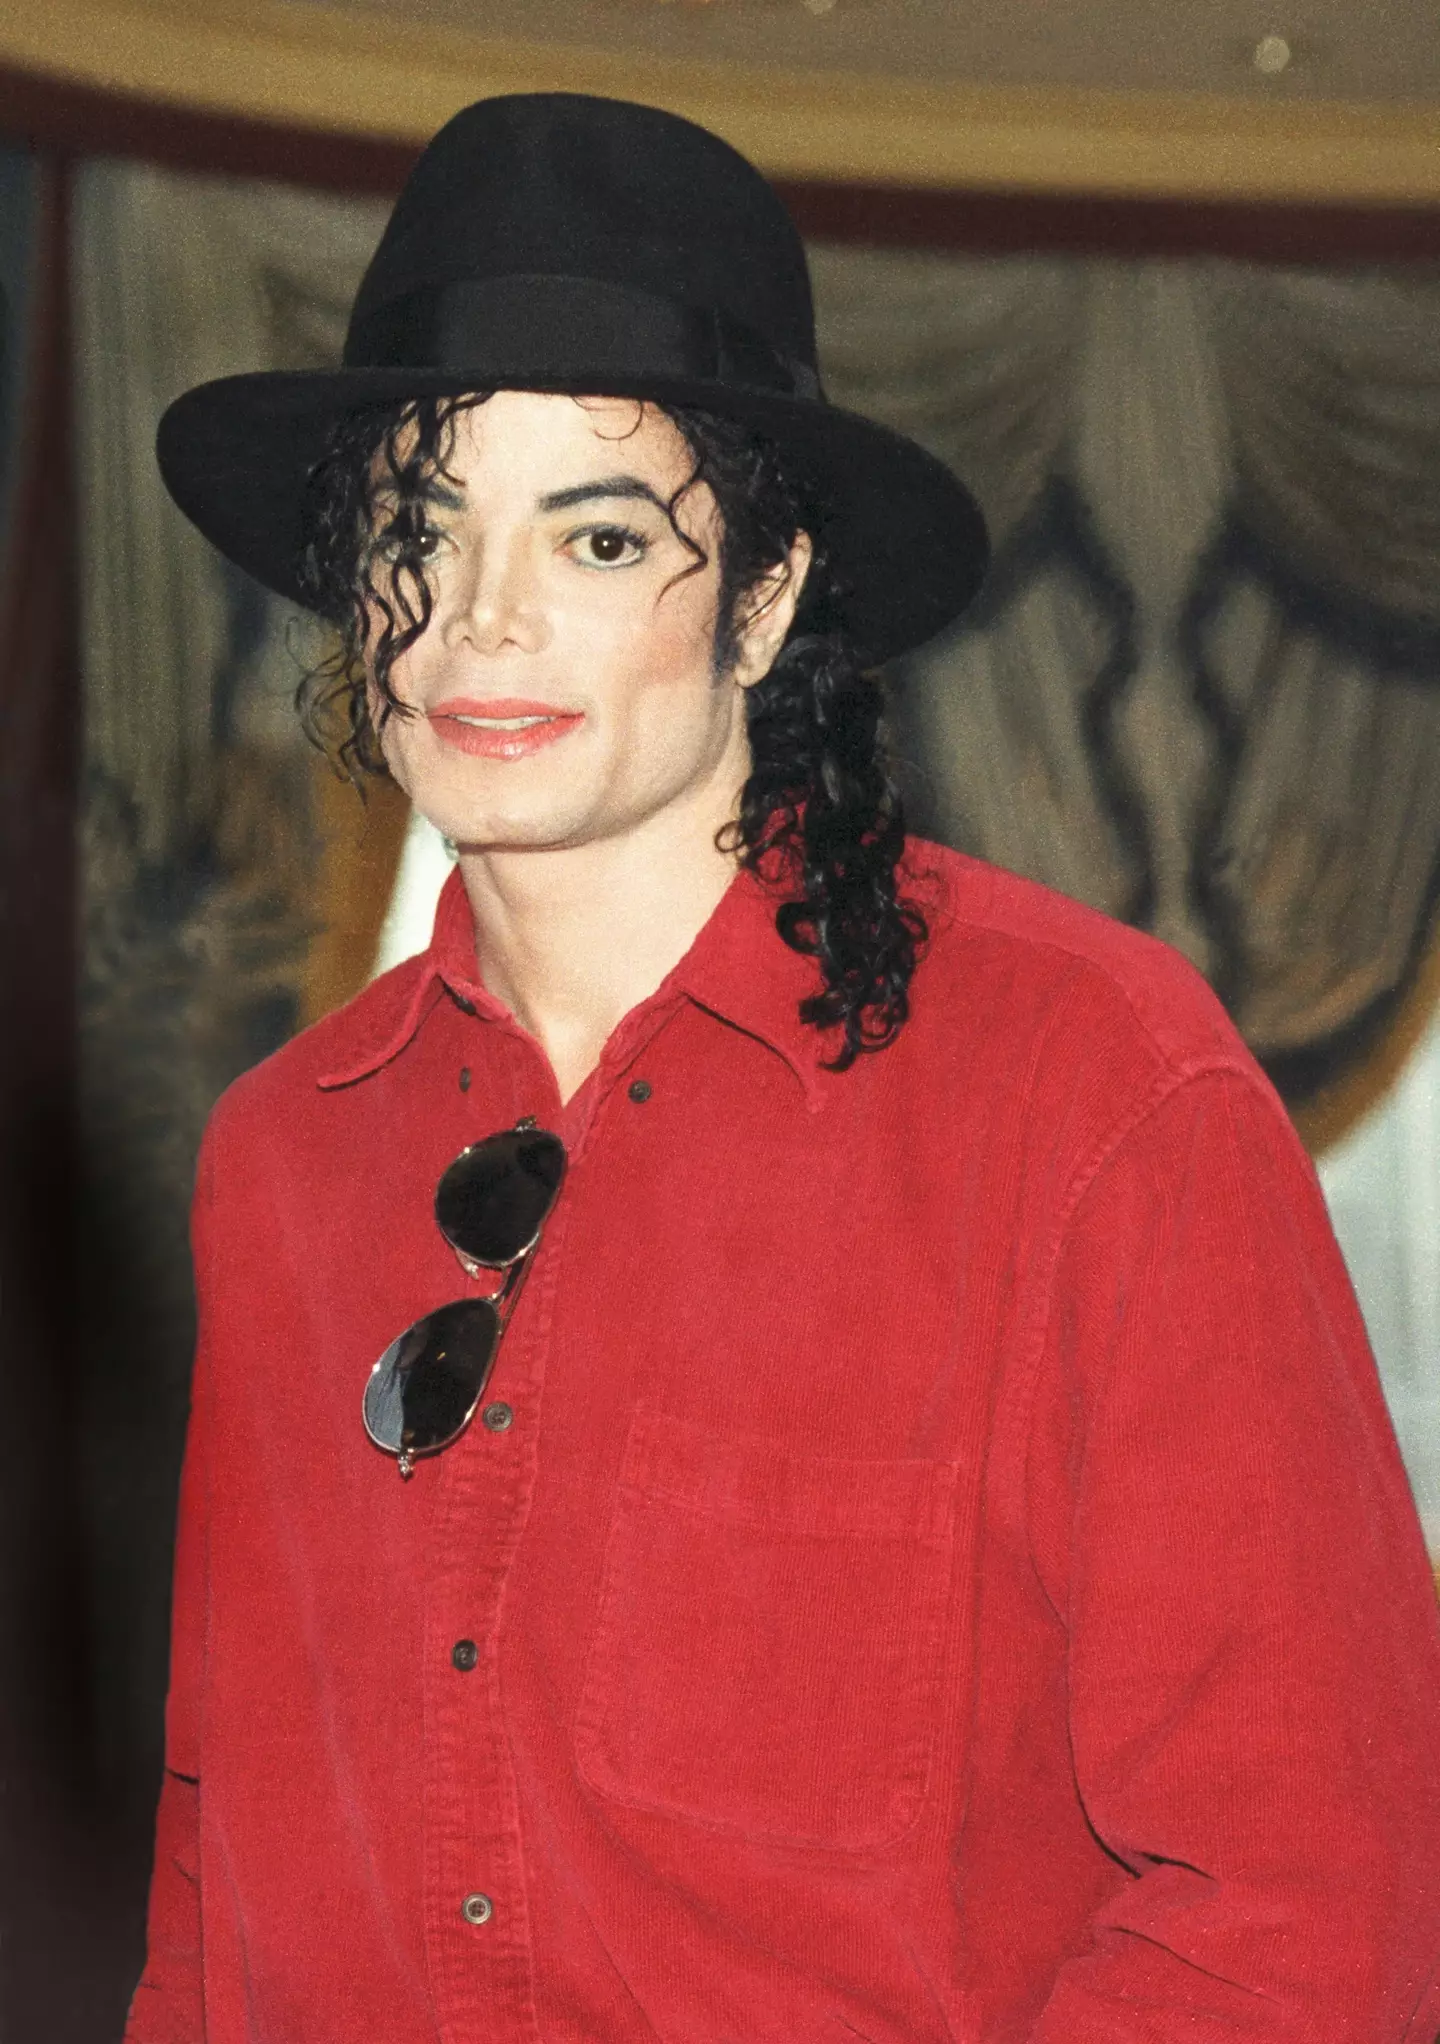 He described Michael Jackson as being a 'disturbing person to be around'.